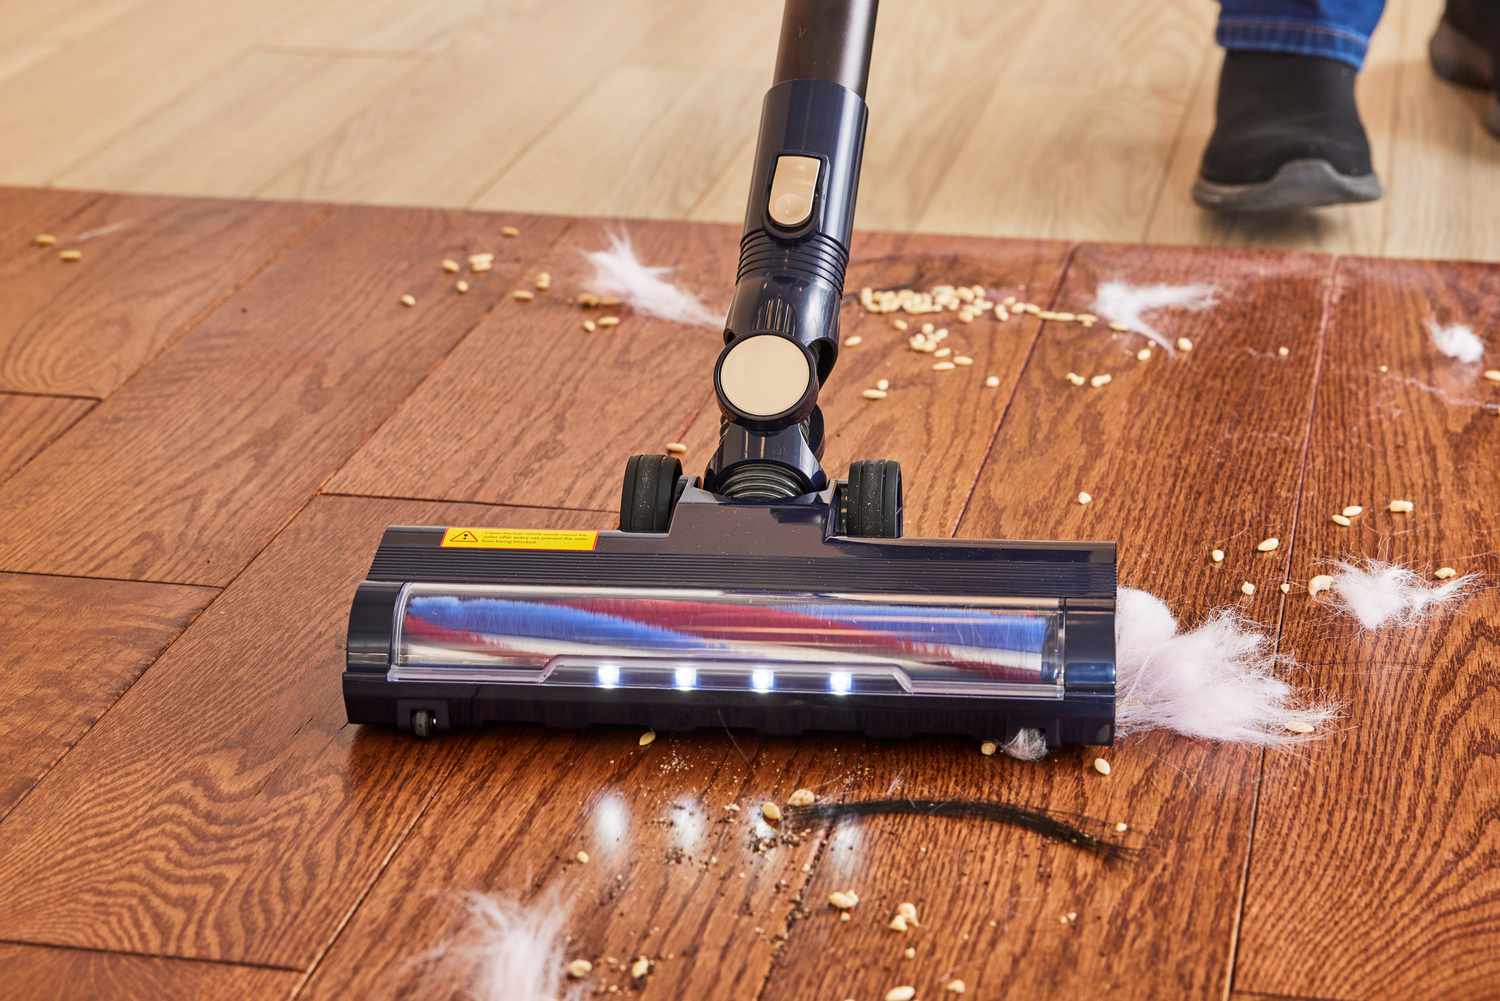 The Homeika Cordless Vacuum cleaning a mess on a wooden floor